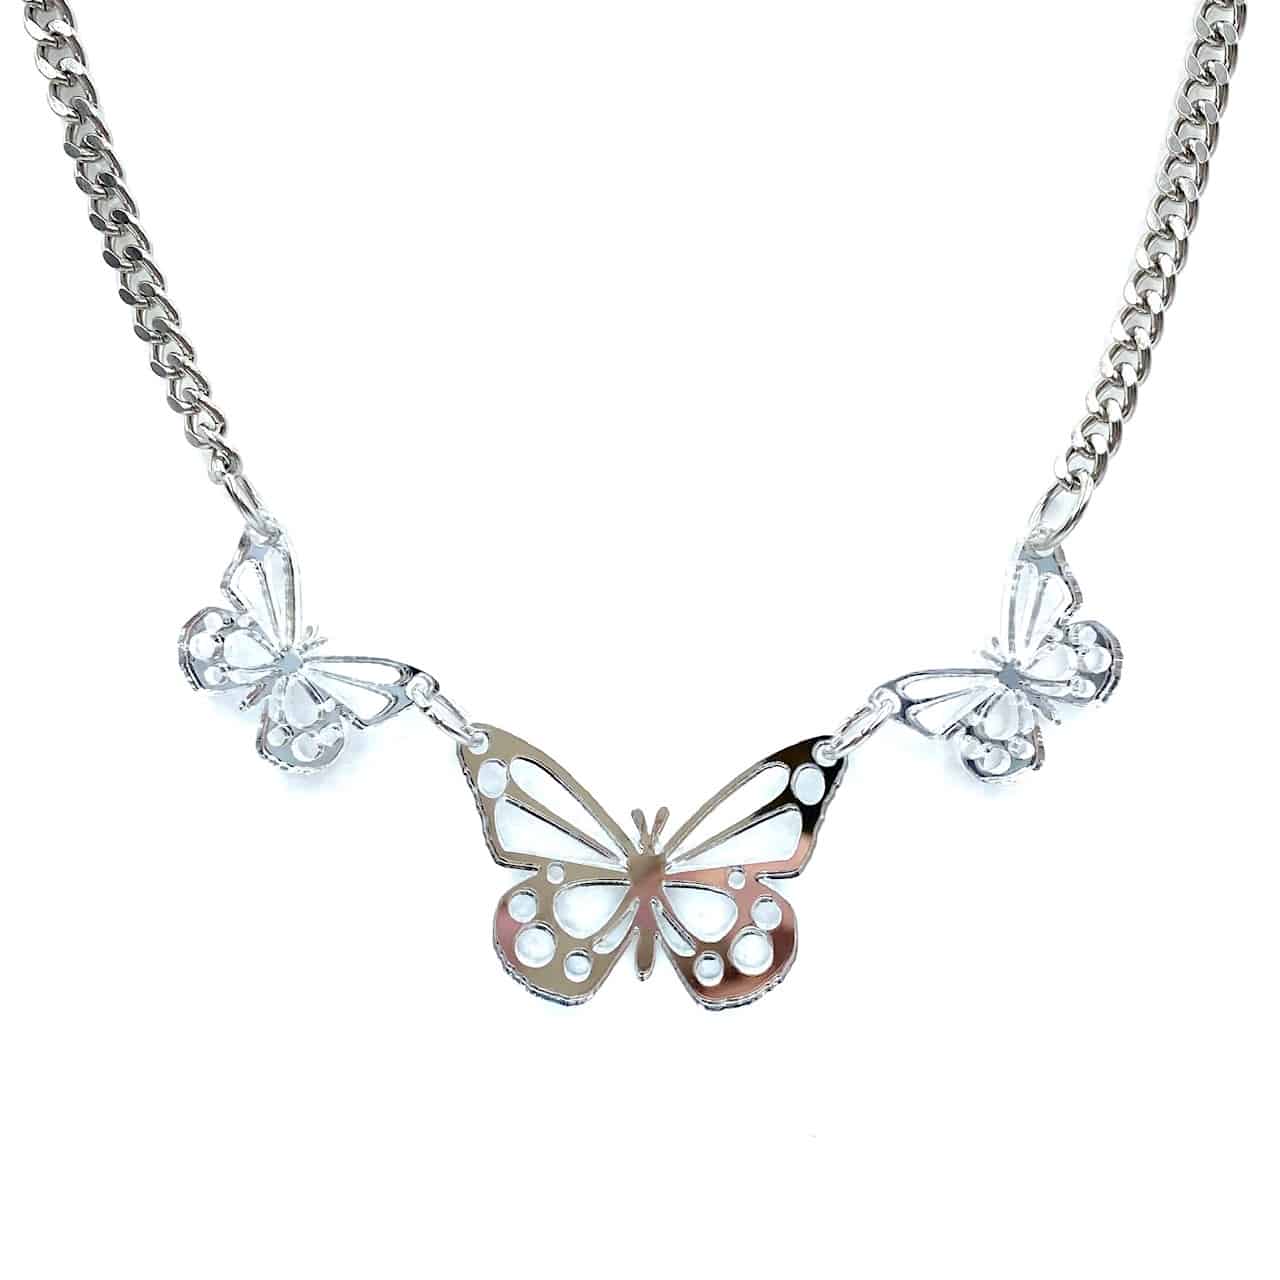 Haus of Dizzy Mirrored Butterfly Necklace